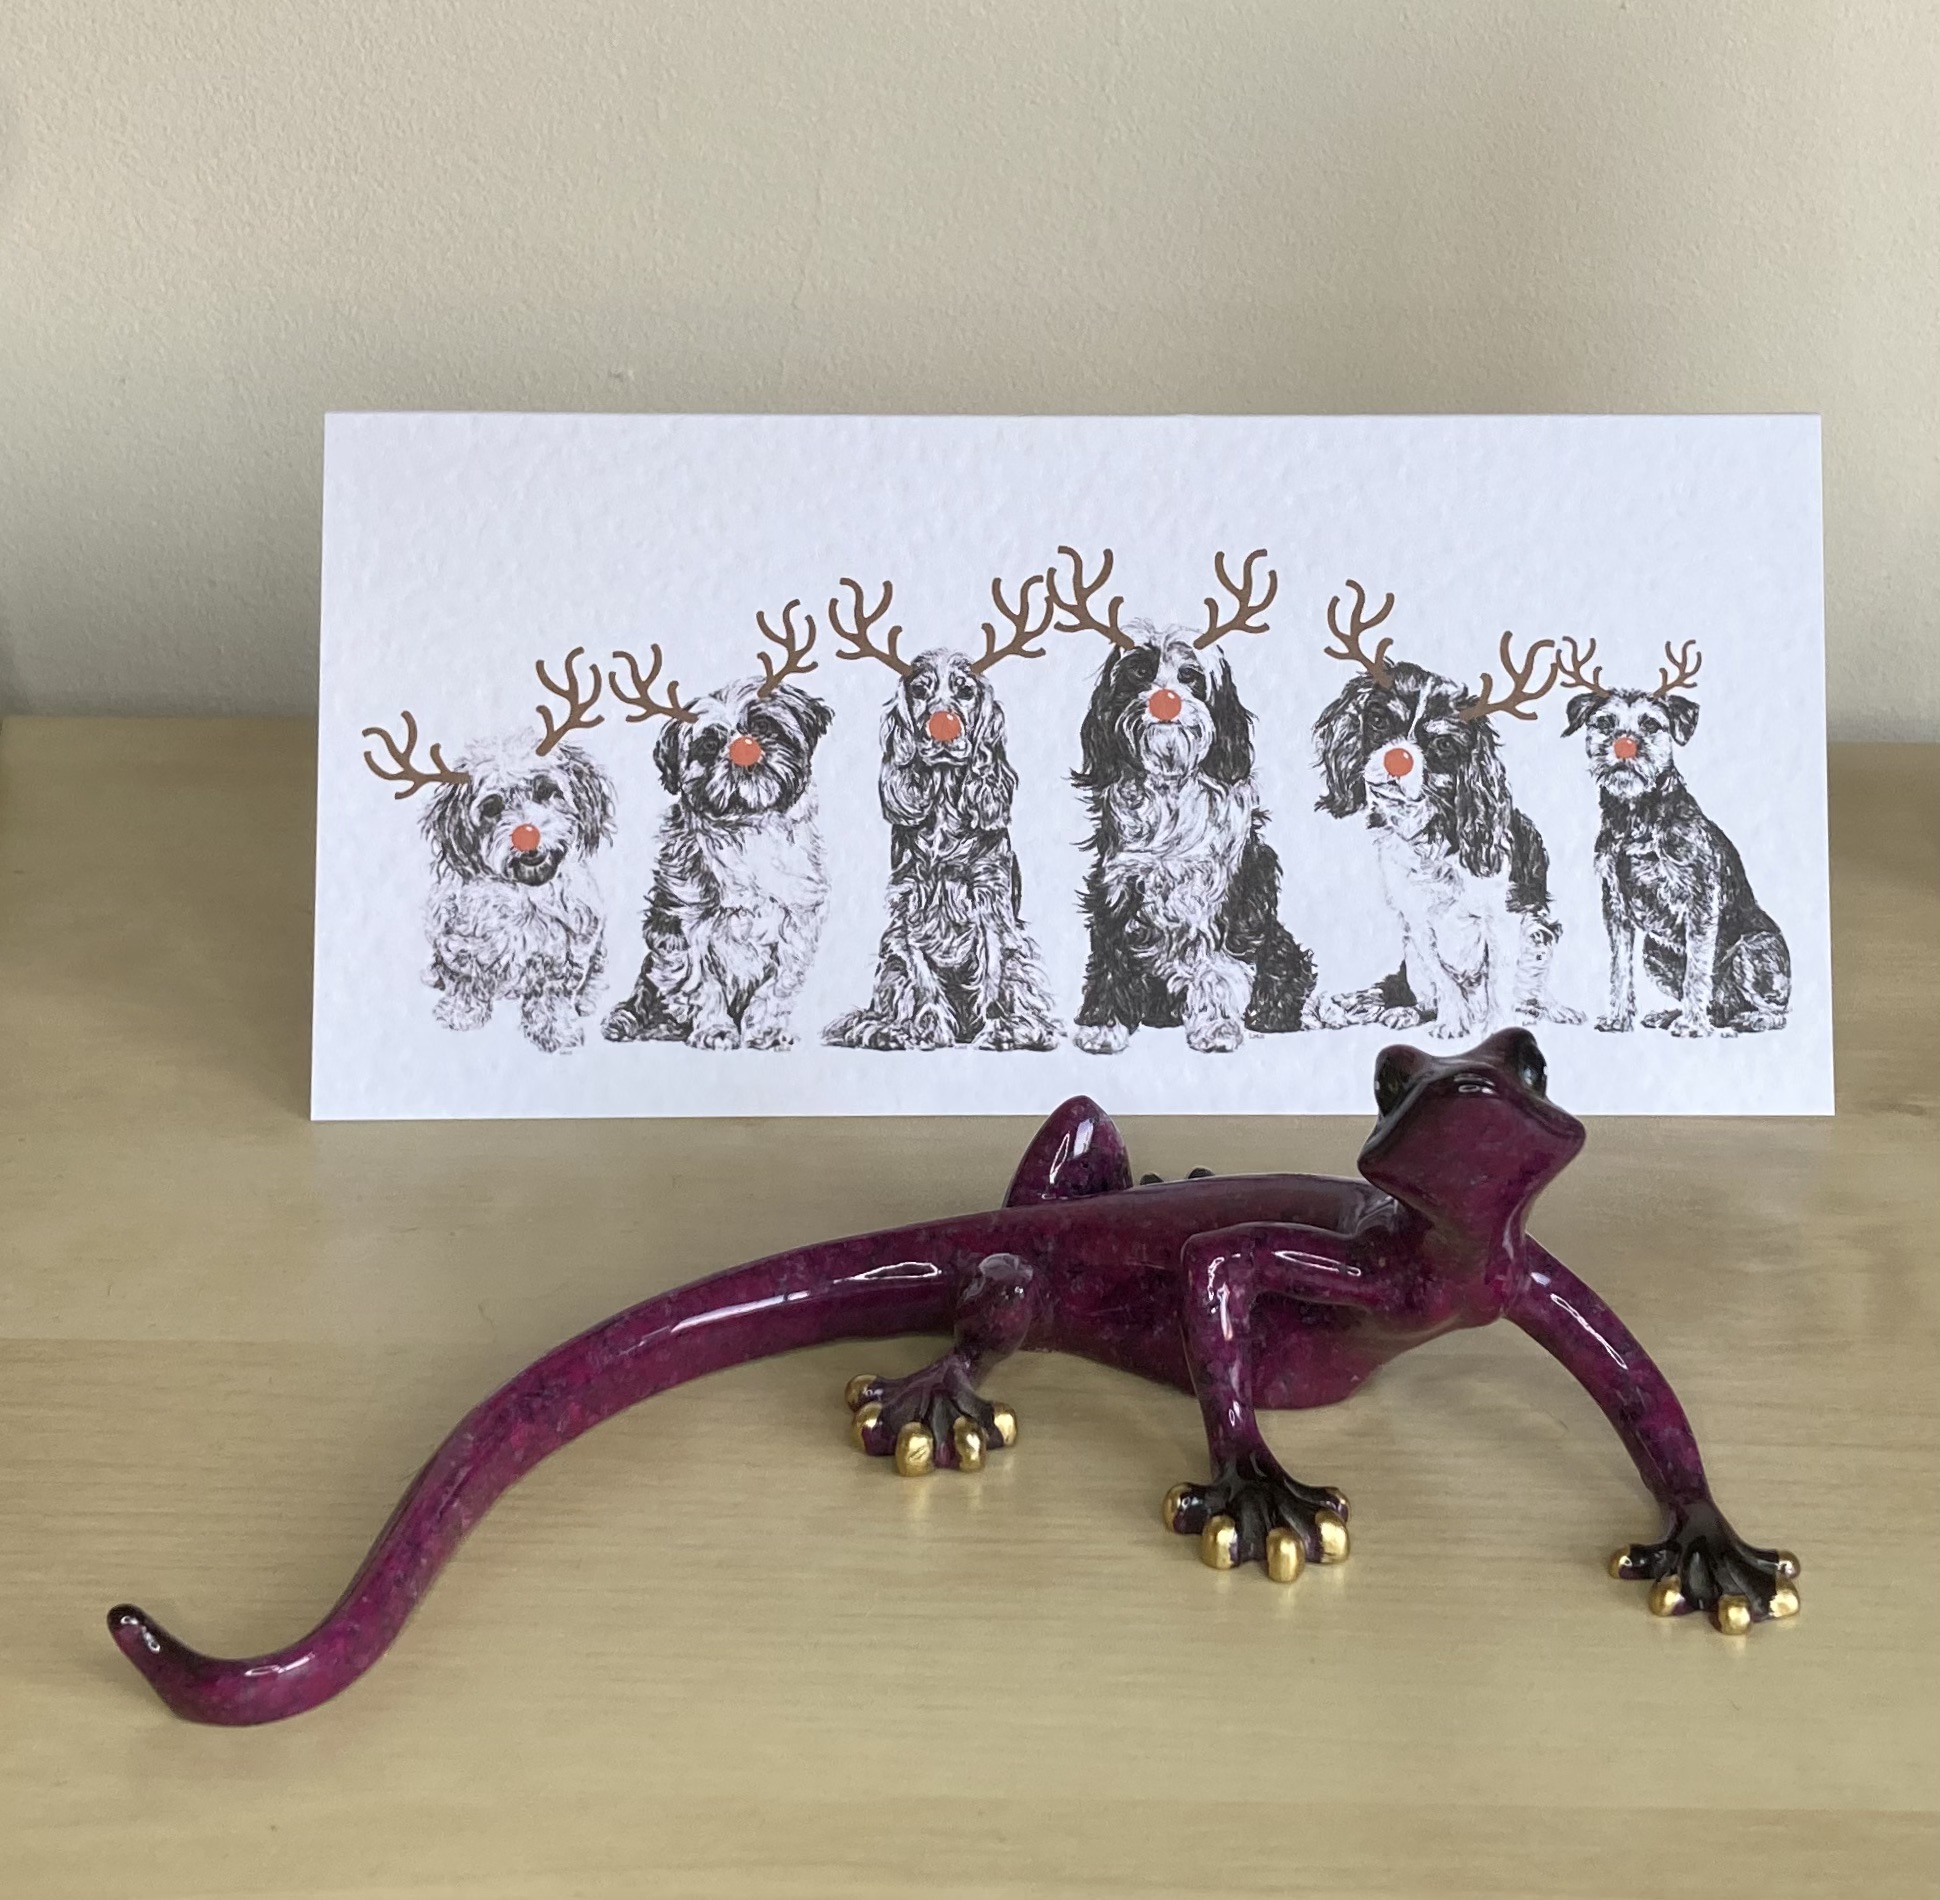 6 dogs with reindeer antlers and red noses Christmas card, Cavachon, Shih Tzu, Cocker Spaniel, Cavalier King Charles Spaniel, and Border Terrier by Louisa Hill